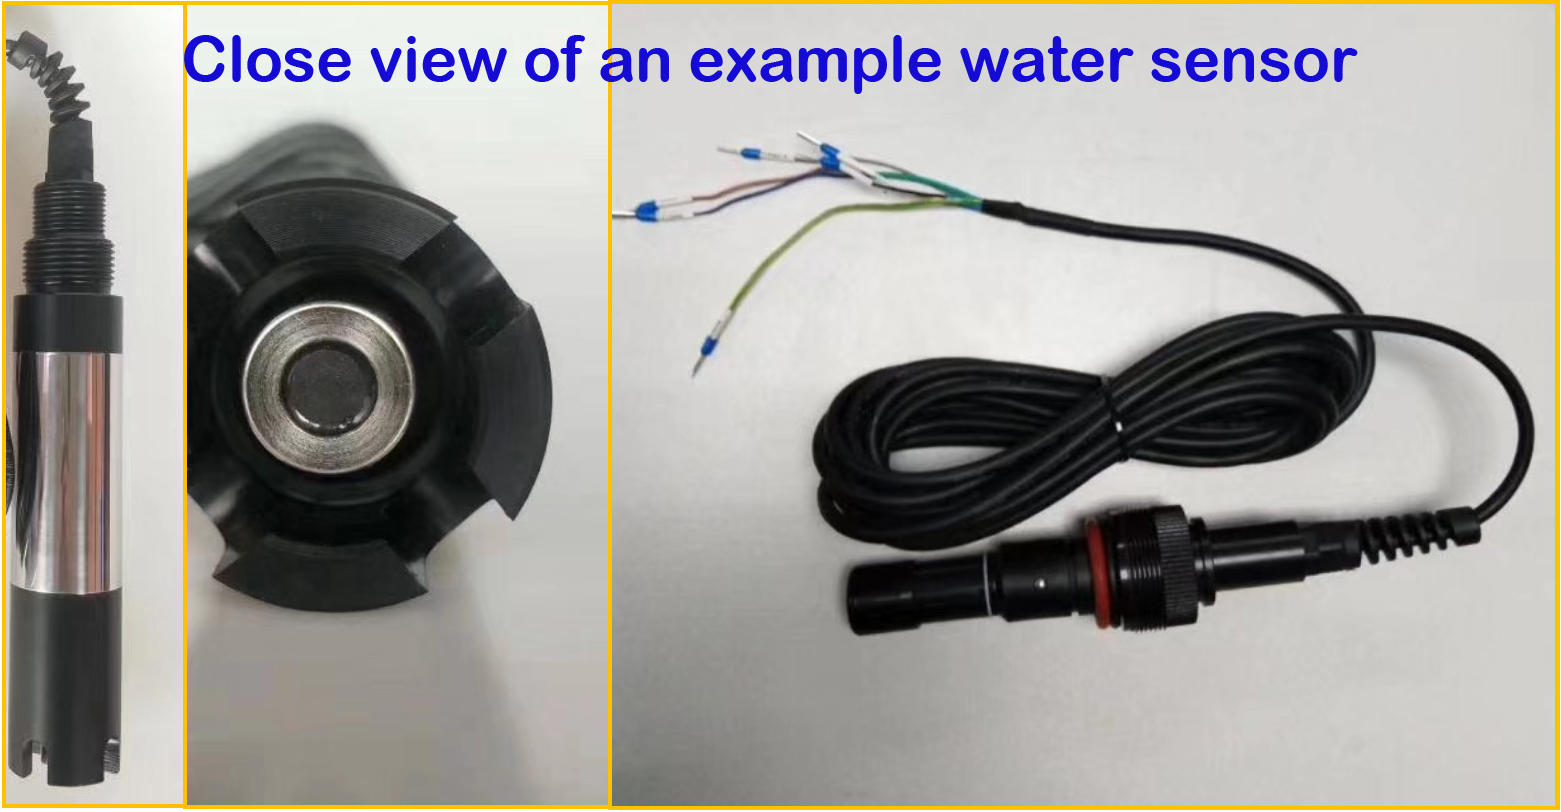 Intelligent Water Sensors for Water Quality Monitoring and Analysis